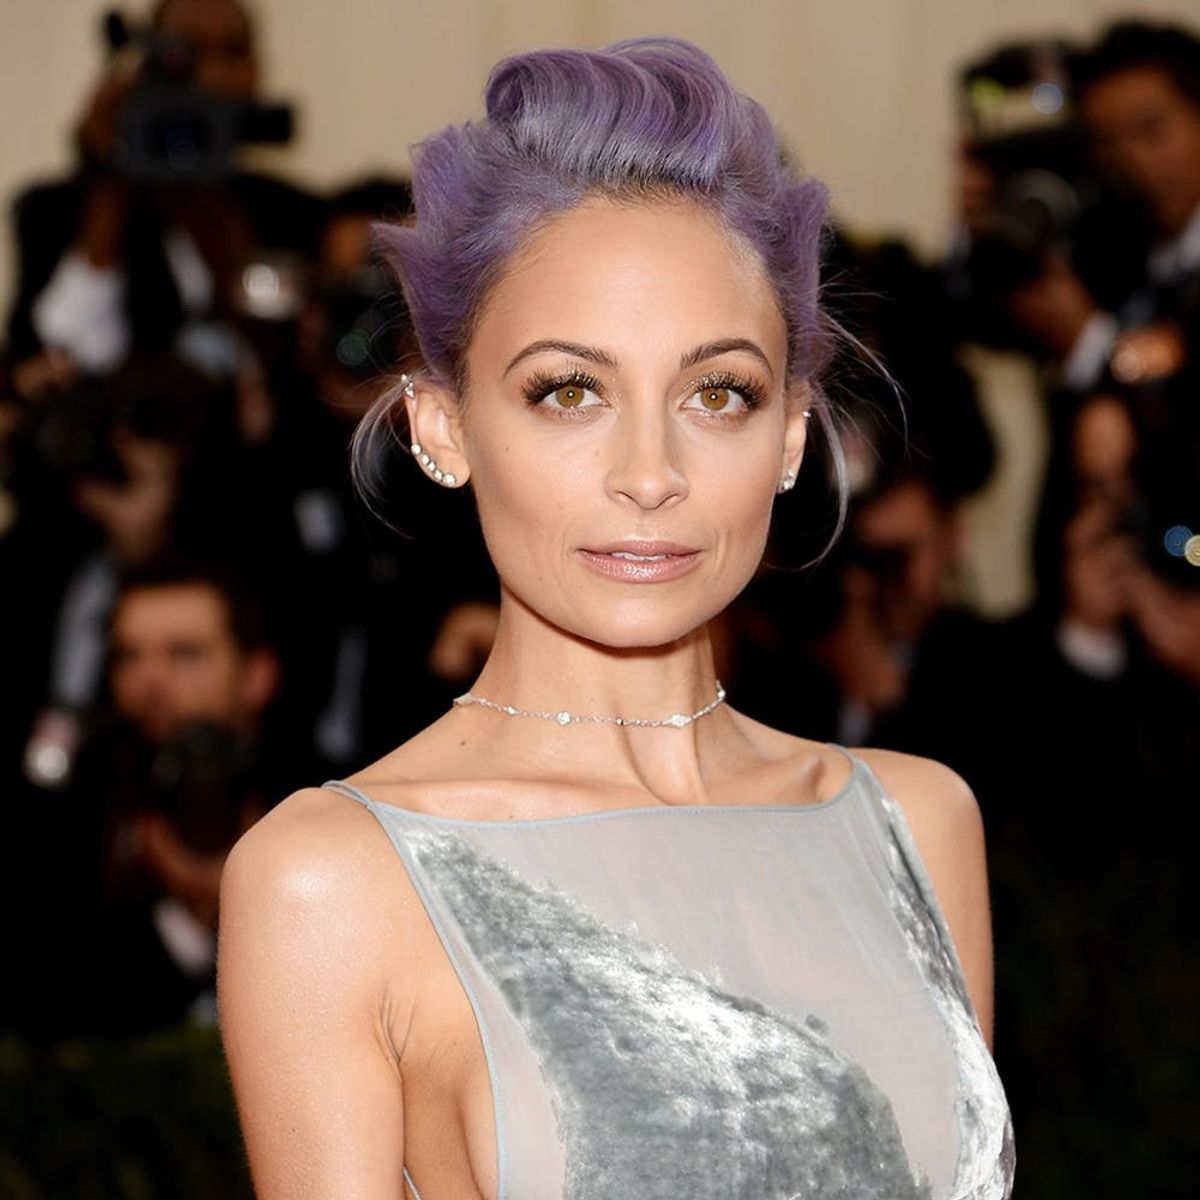 Nicole Richie Just Debuted a Whole New Hair Color